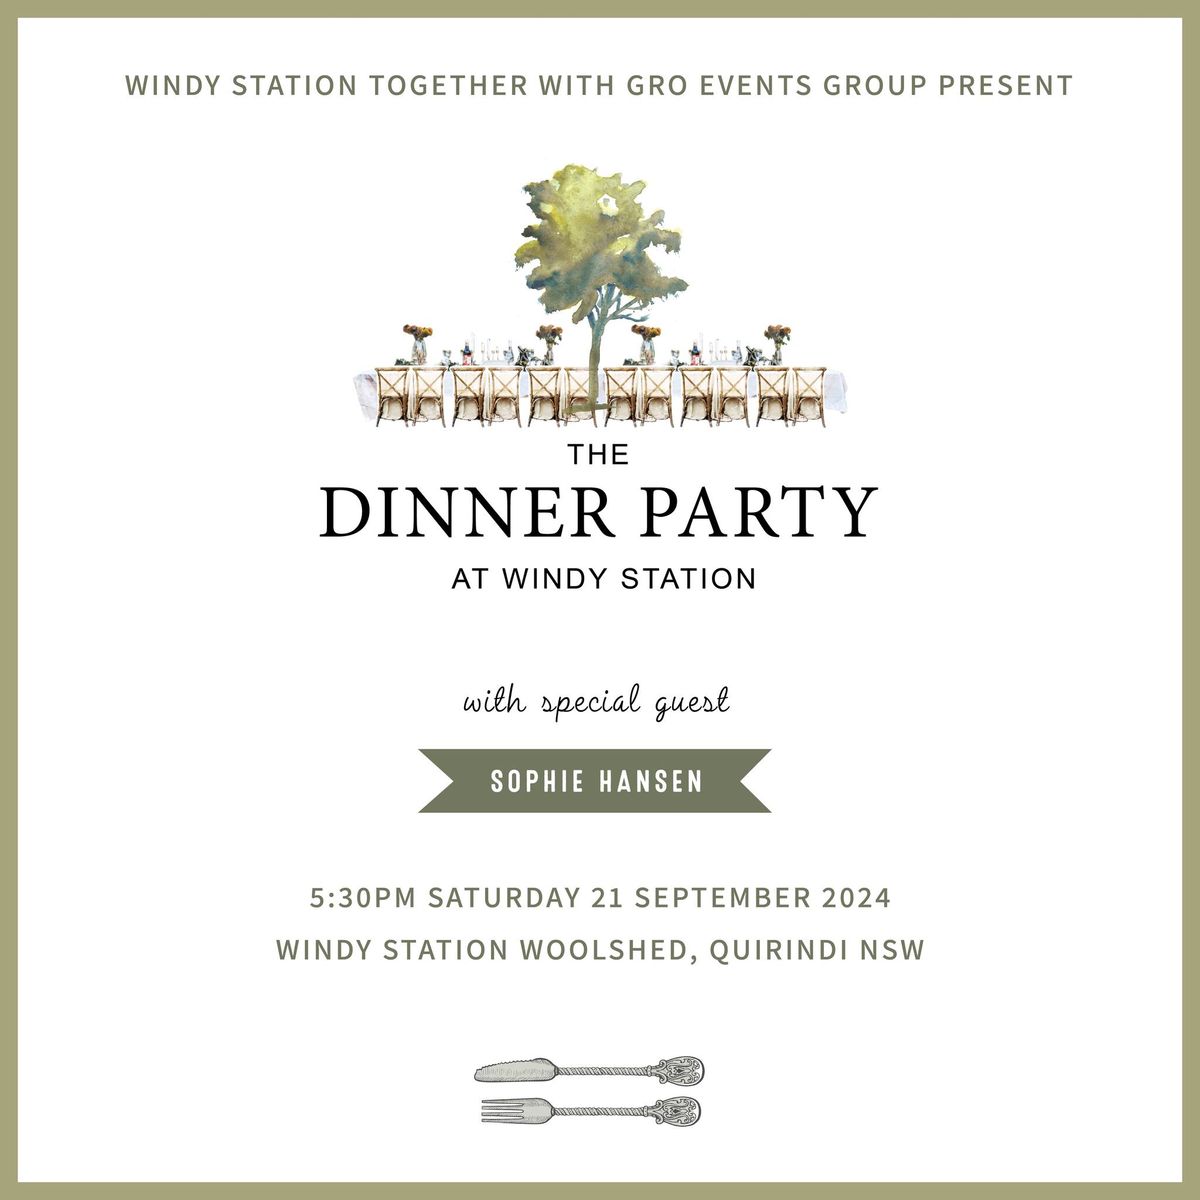 The Dinner Party at Windy Station